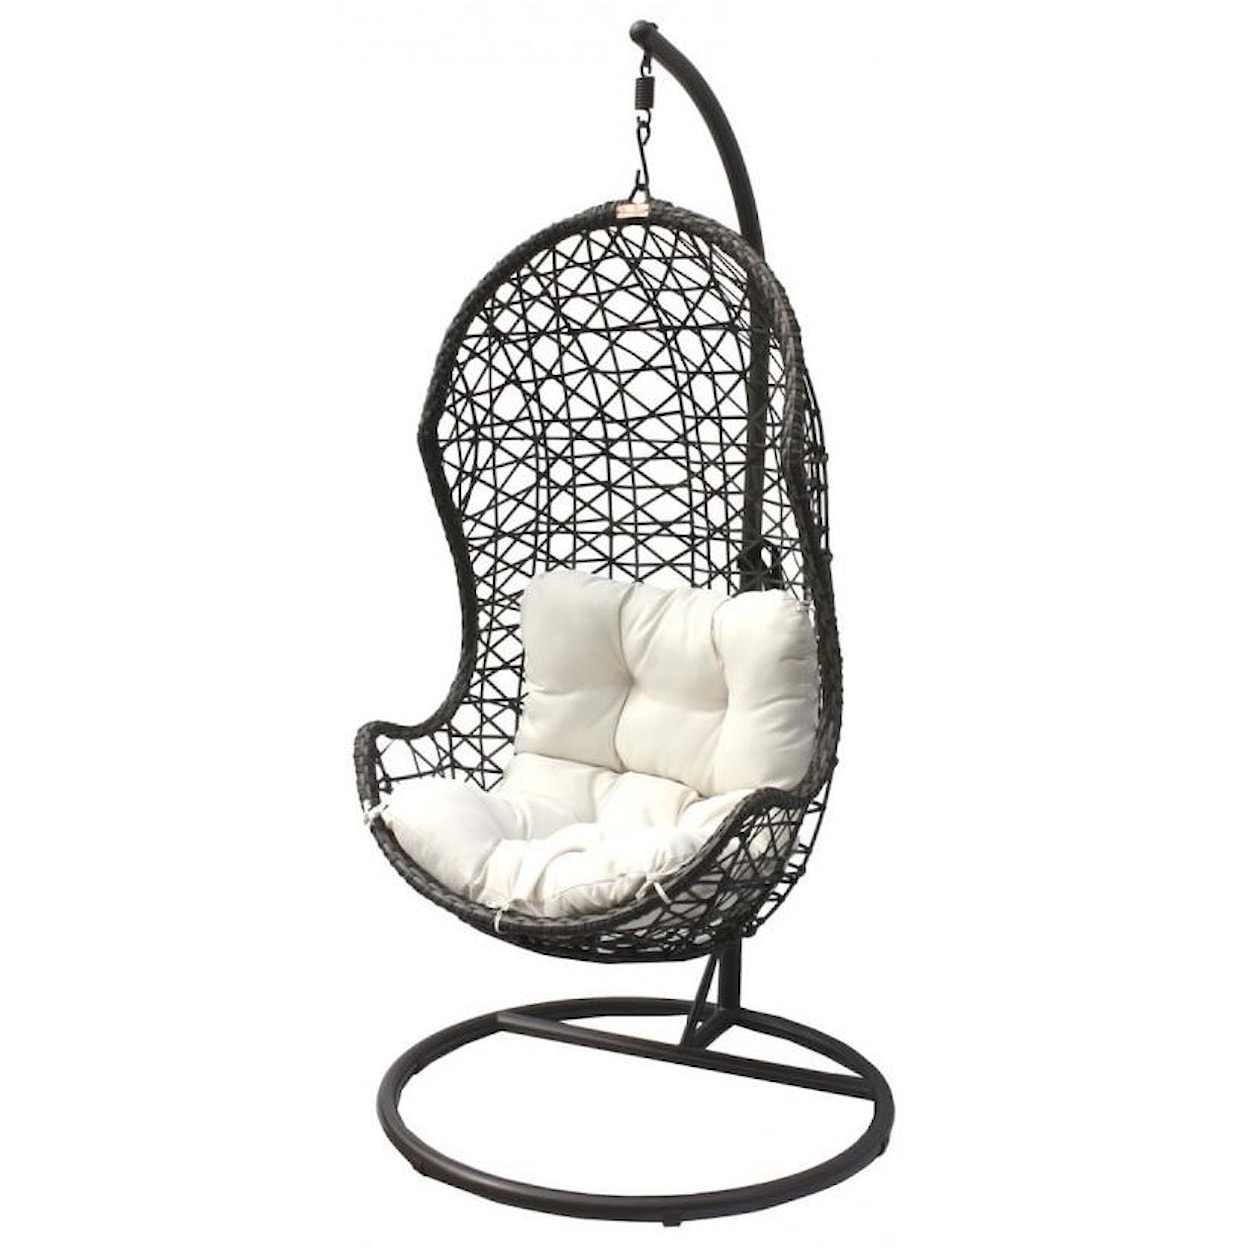 Pelican Reef Panama Jack Accents Hanging Chair w/metal stand